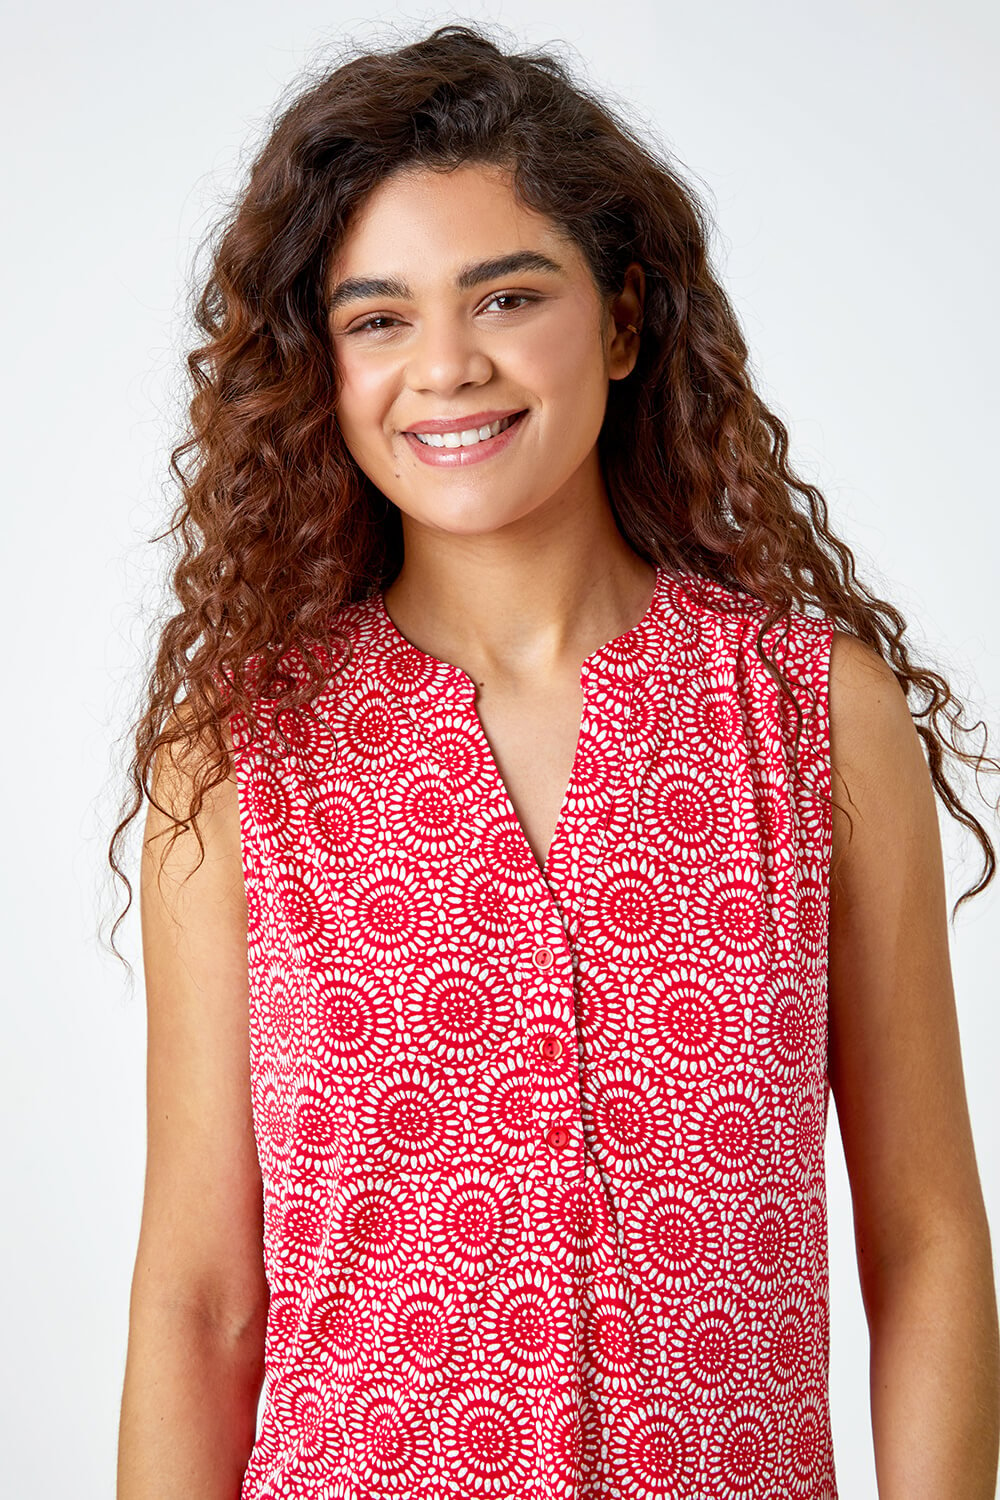 CORAL Mosaic Print Stretch Jersey Top, Image 4 of 5